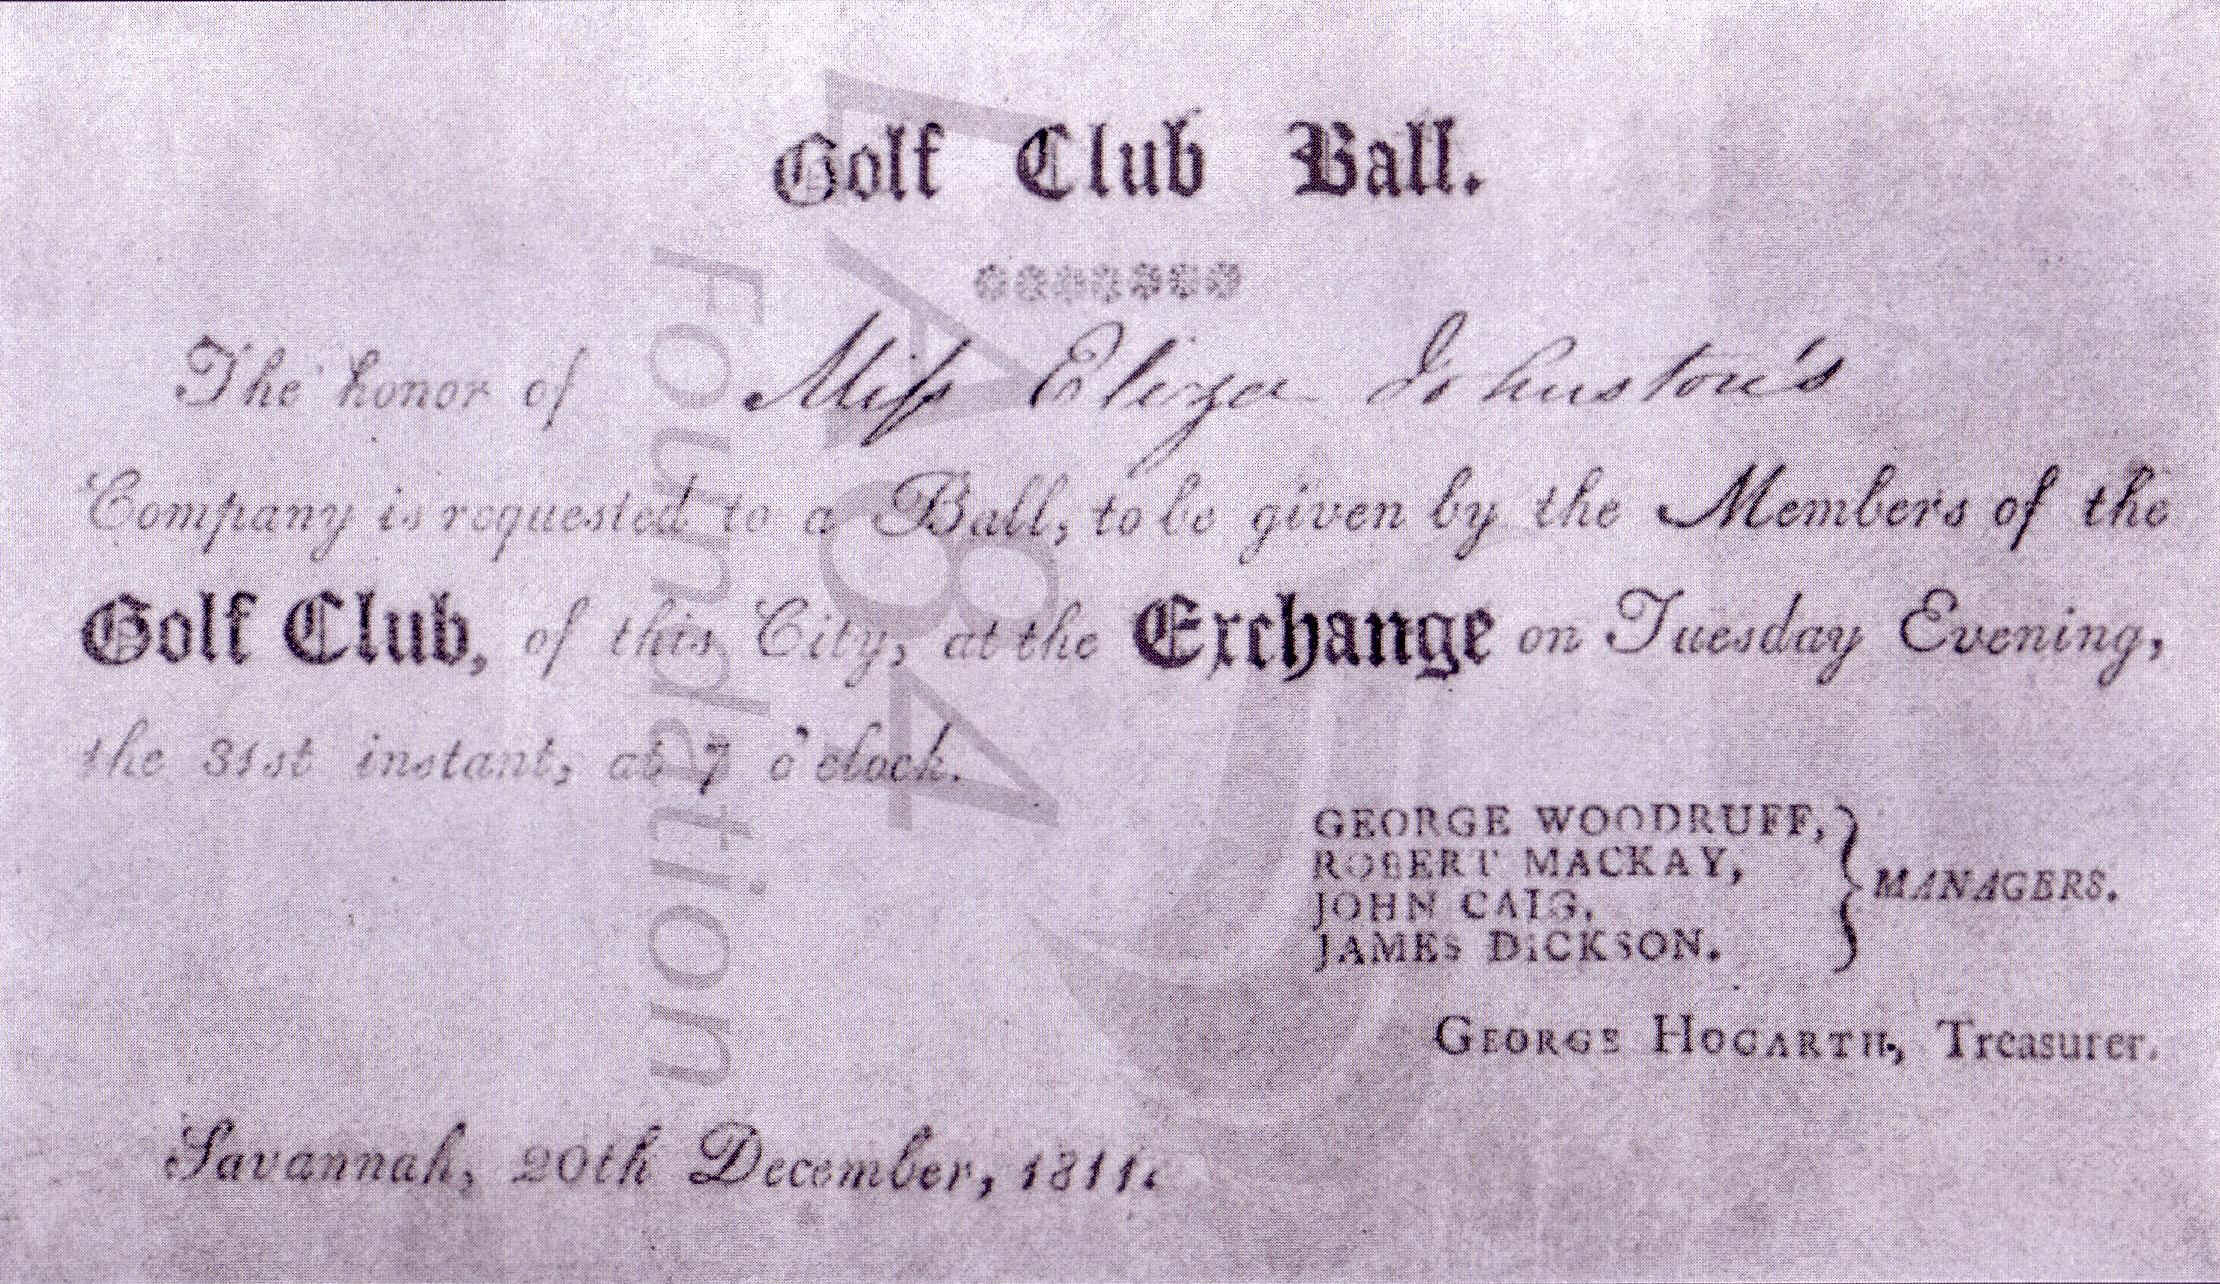 A copy of an invitation to a Golf Club ball in Savannah Georgia,  which goes to show golf was played in the United States as far back as 1811.